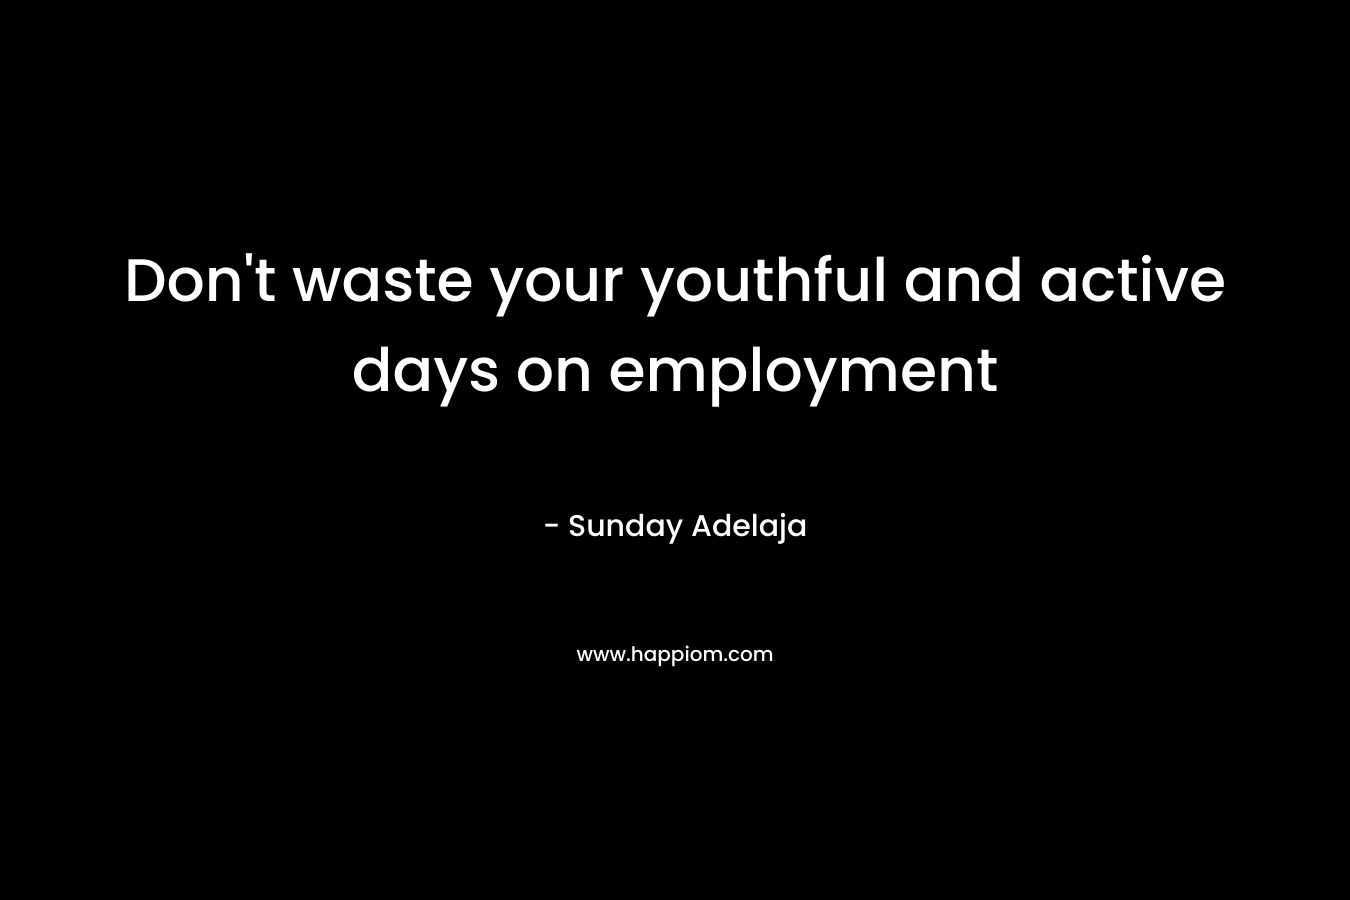 Don't waste your youthful and active days on employment